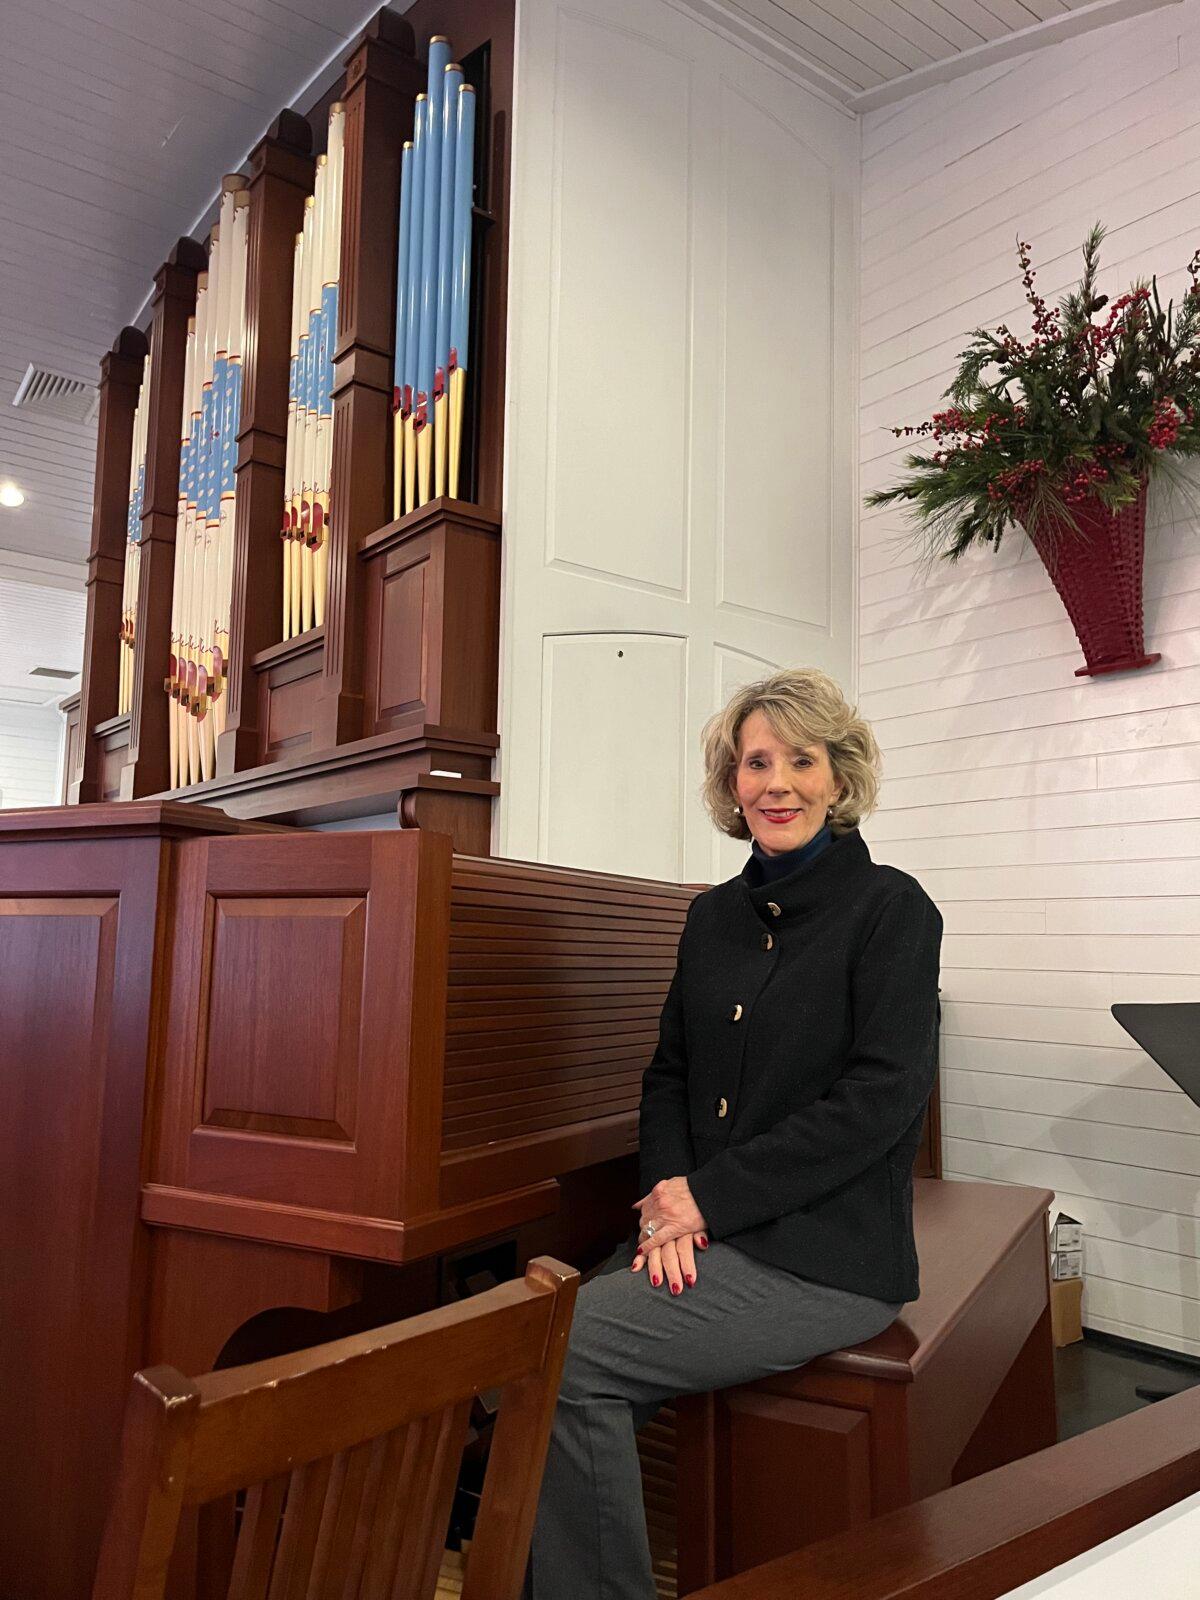 Angela Jenkins beside the pipe organ she plays at the First Presbyterian Church of Highlands. (Courtesy of Deena Bouknight)